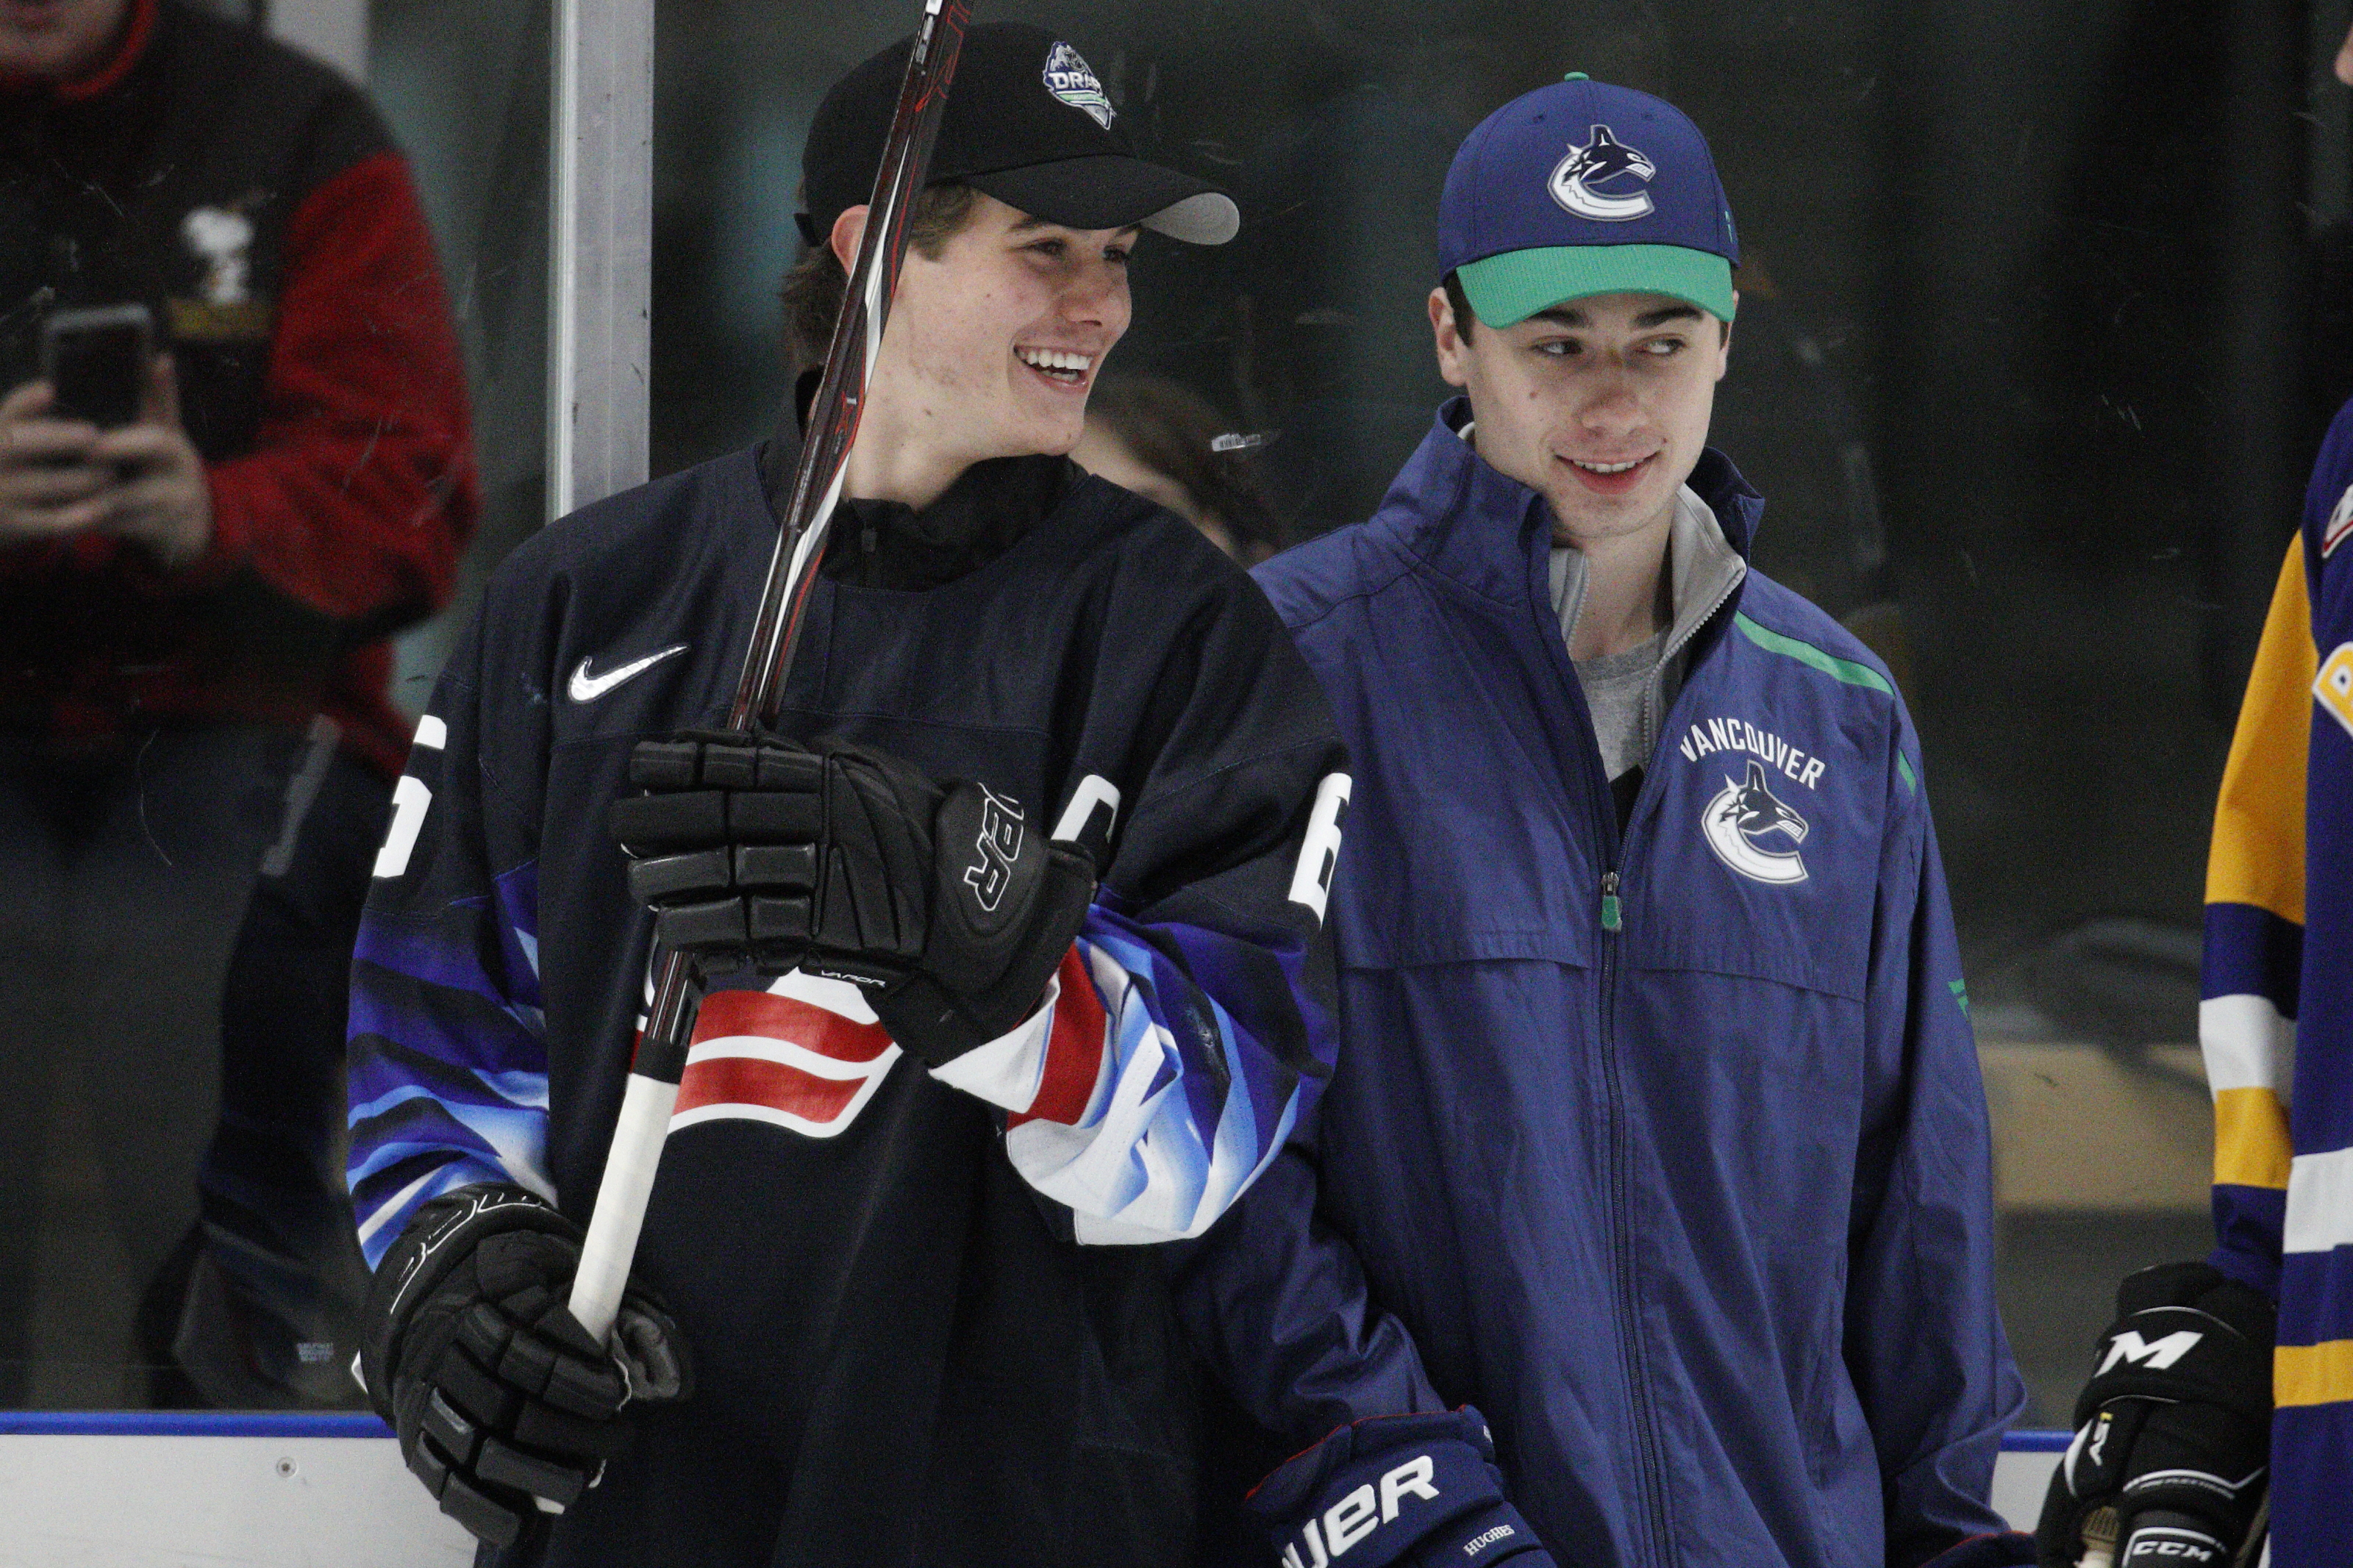 Next N.H.L. First for Jack Hughes: A Game Against His Brother